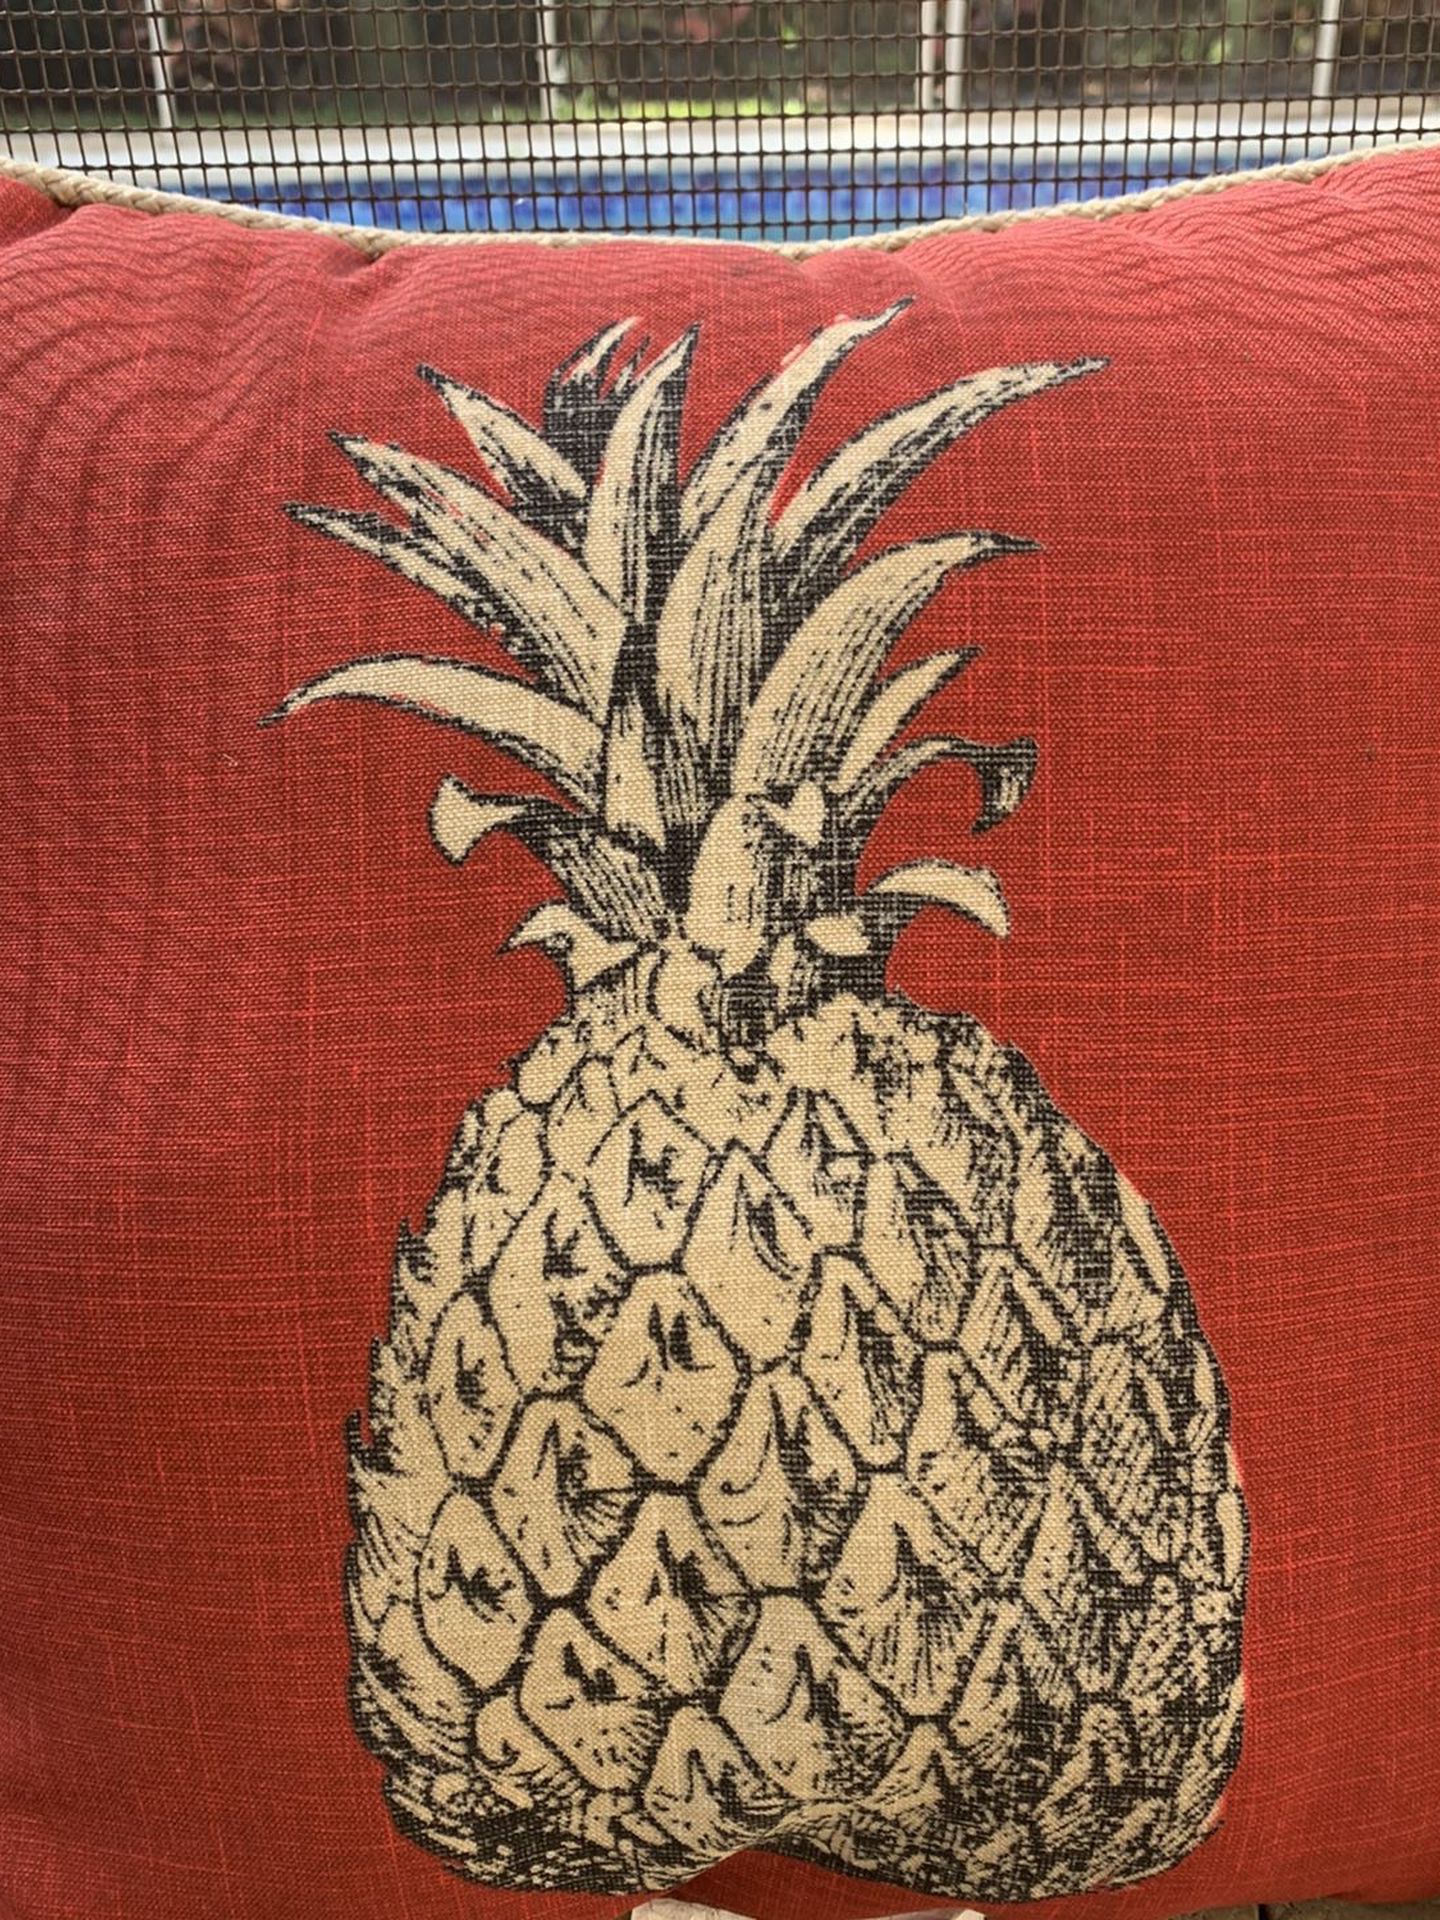 3 Pineapple Pool Side Pillows.